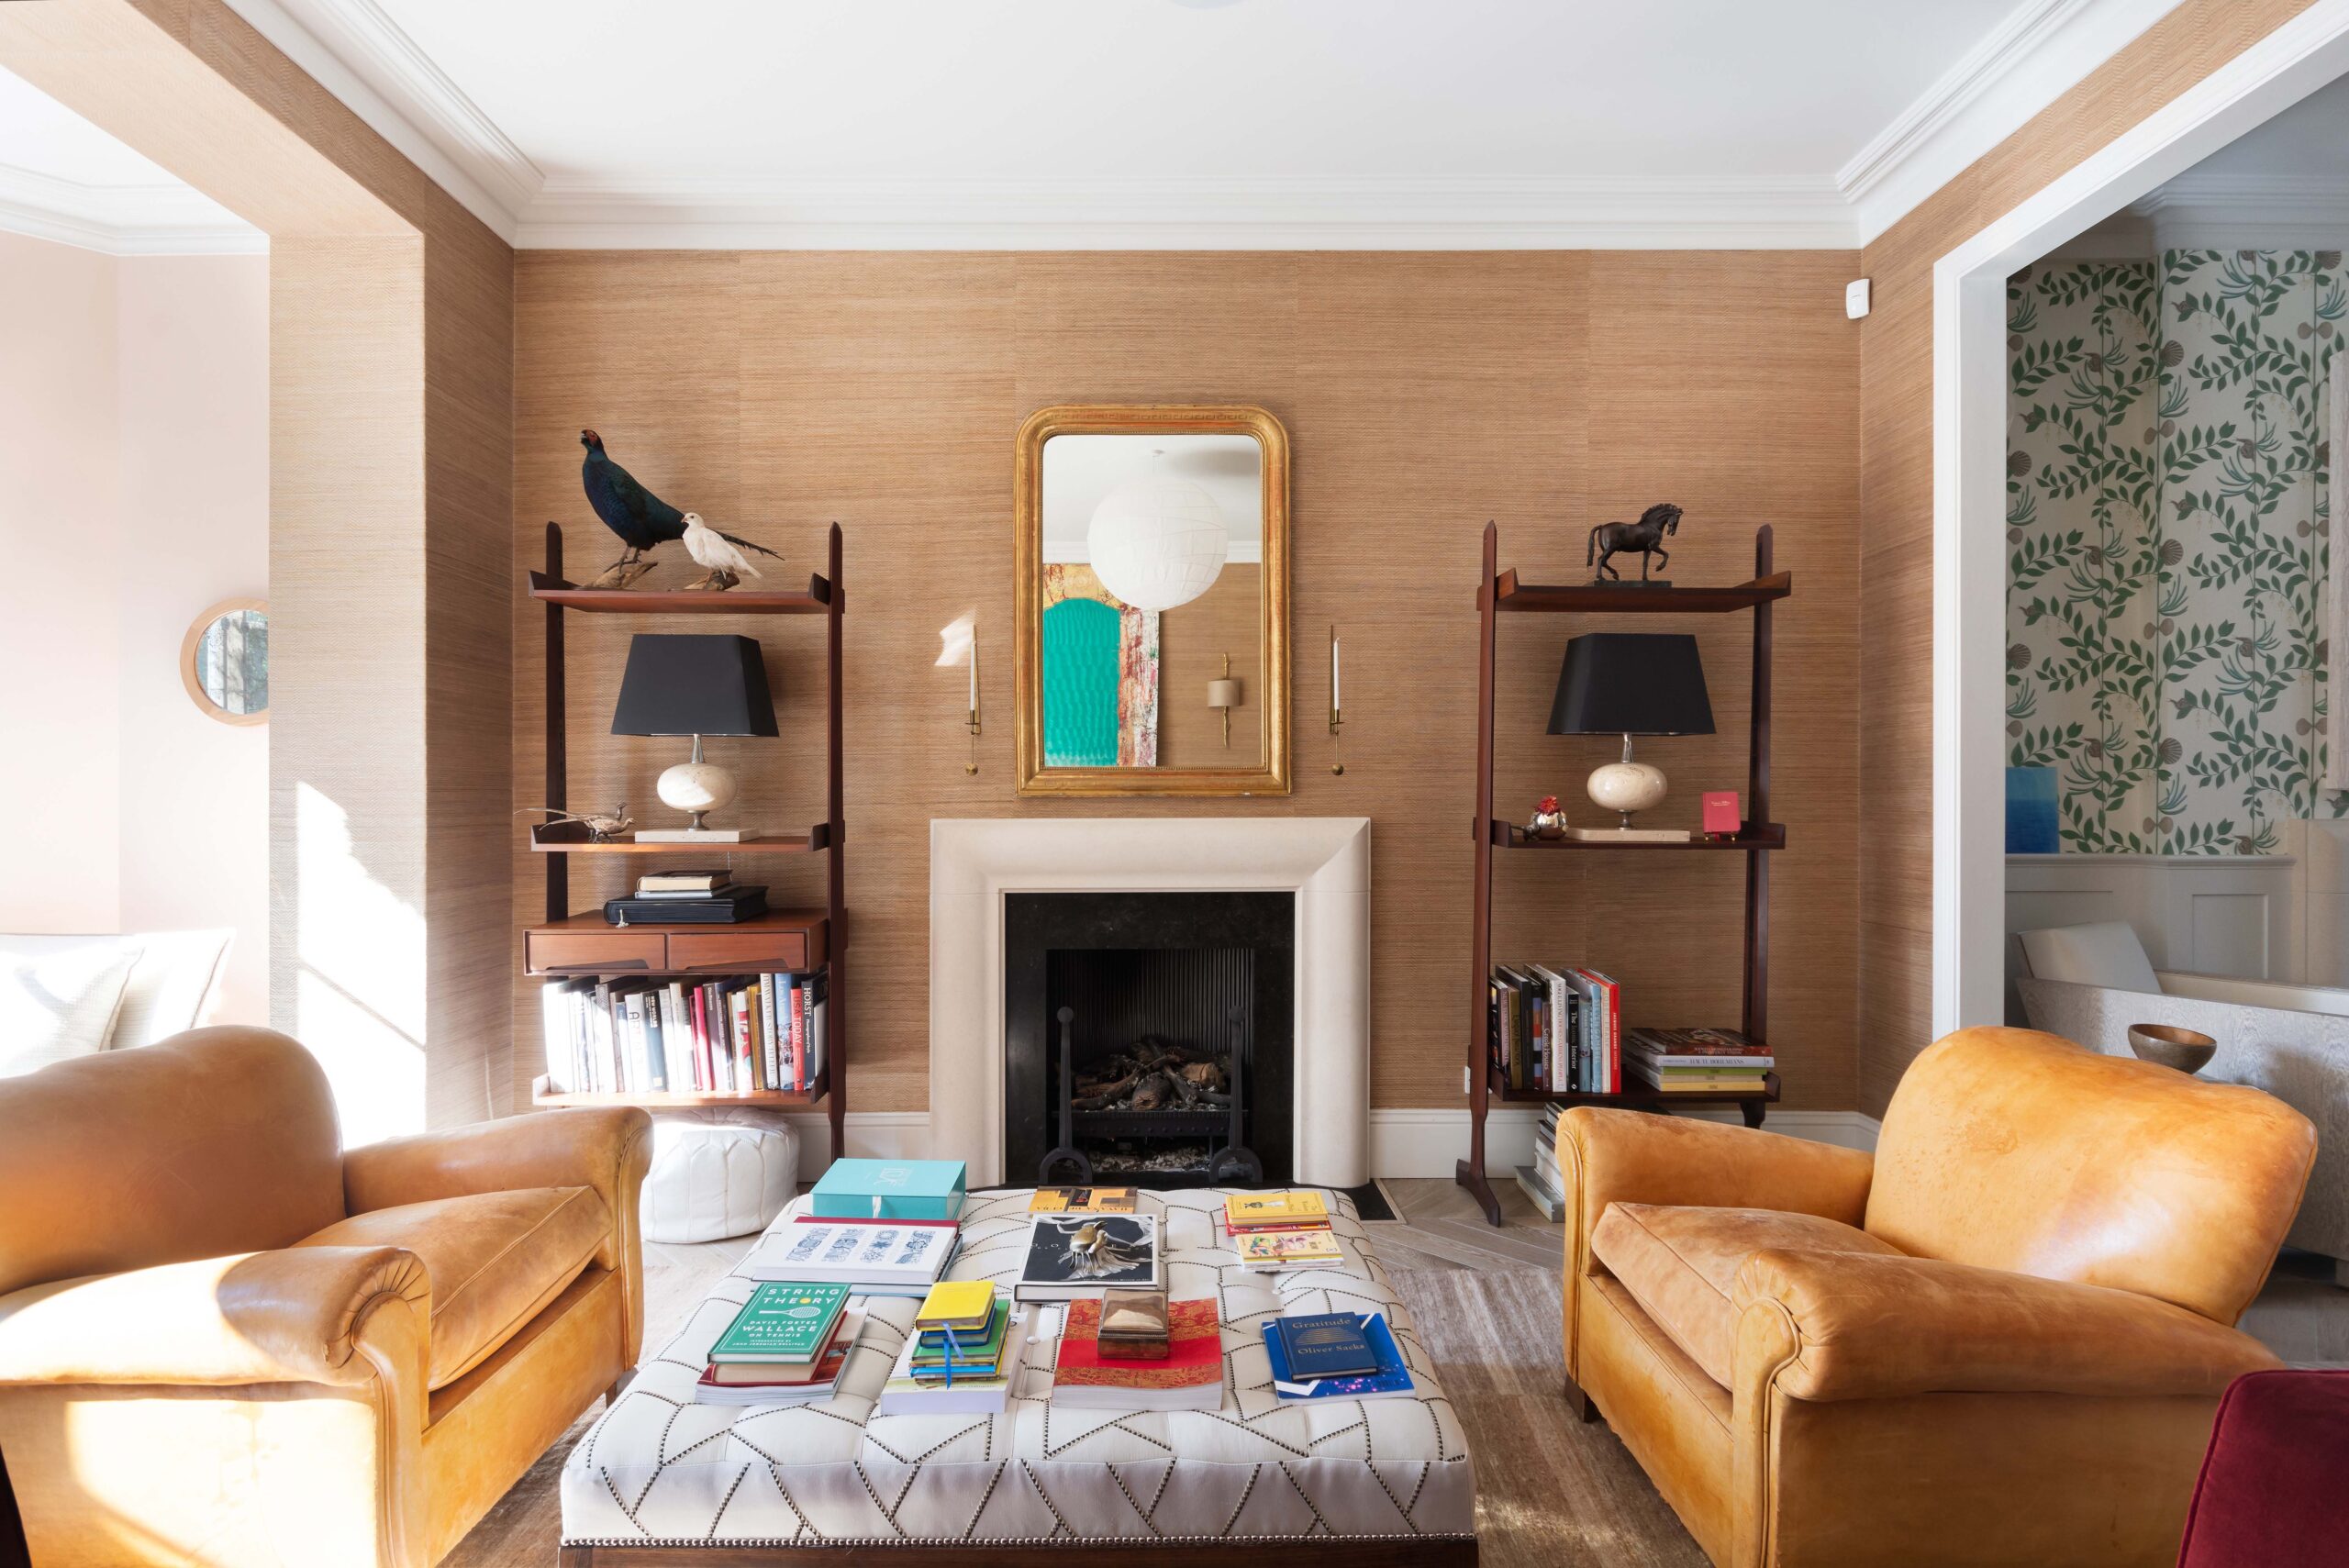 Hammersmith Grove living room with tan sofas and walls